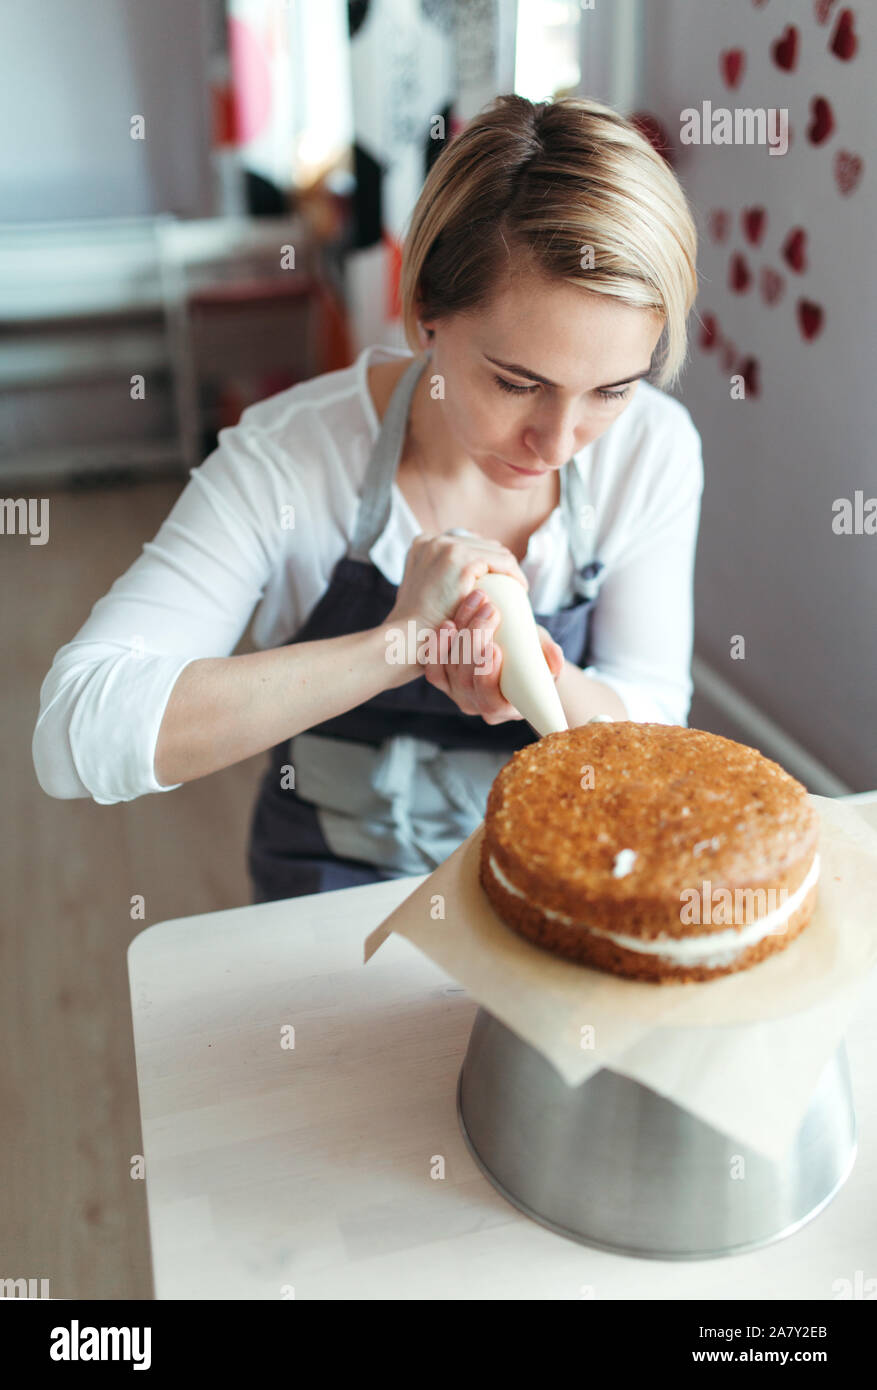 A middle aged woman confectioner or baker. Stock Photo